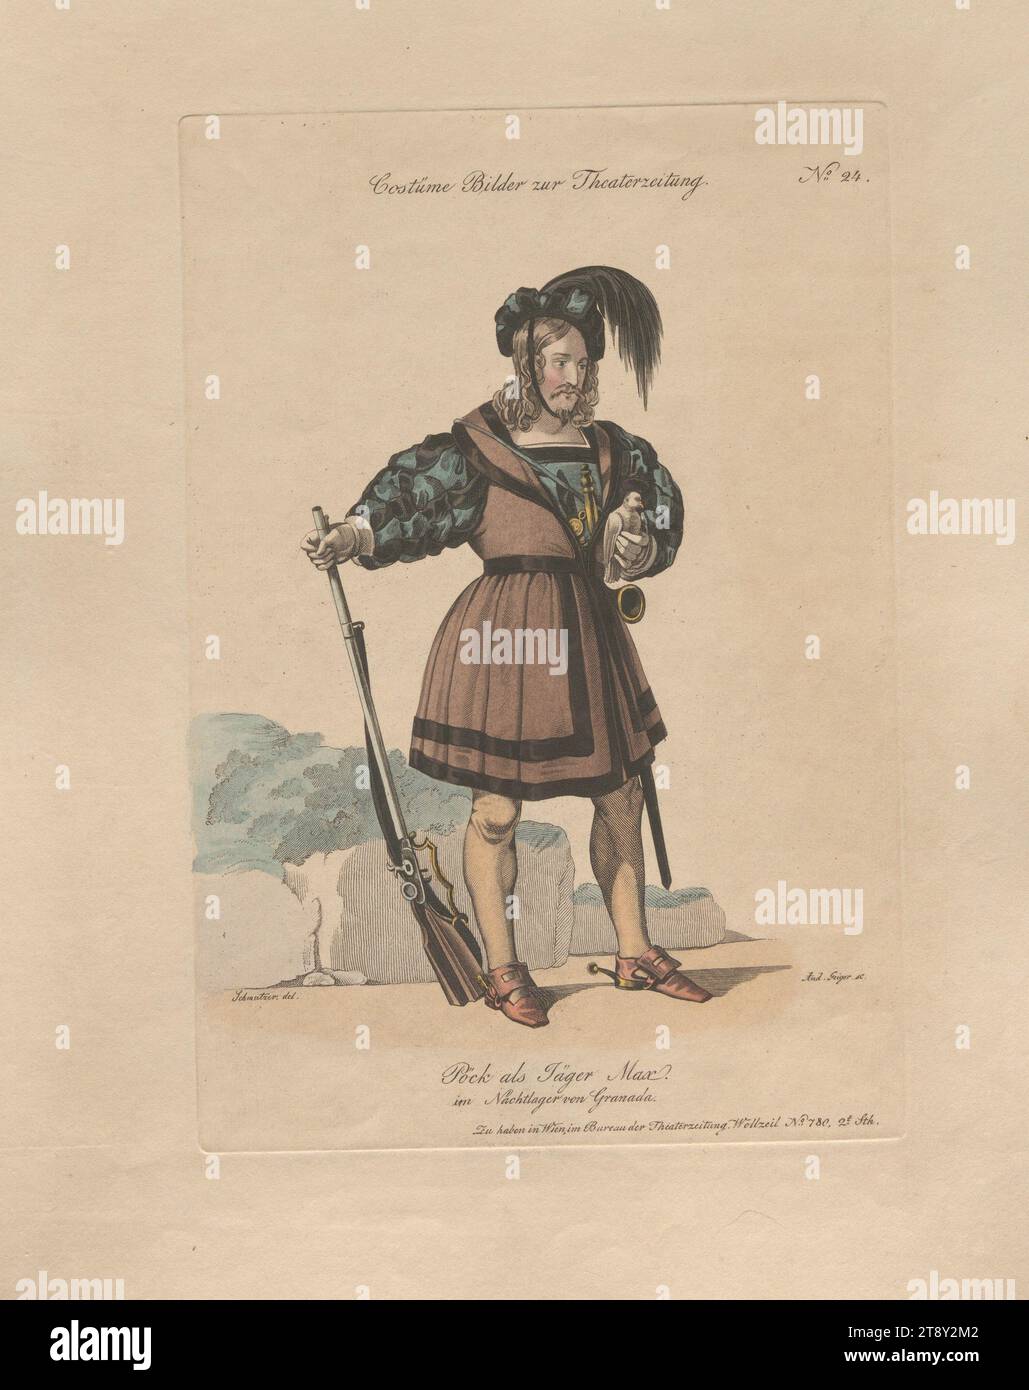 Karl Josef Pöck as the hunter Max in 'Night Camp of Granada' (costume picture no. 24 to the theater newspaper), Andreas Geiger (1765-1856), Artist, 1834, colorised, copperplate engraving, sheet size 29, 3×23, 6 cm, Theatre, Performing arts, Fine Arts, actor (on the stage), The Vienna Collection Stock Photo